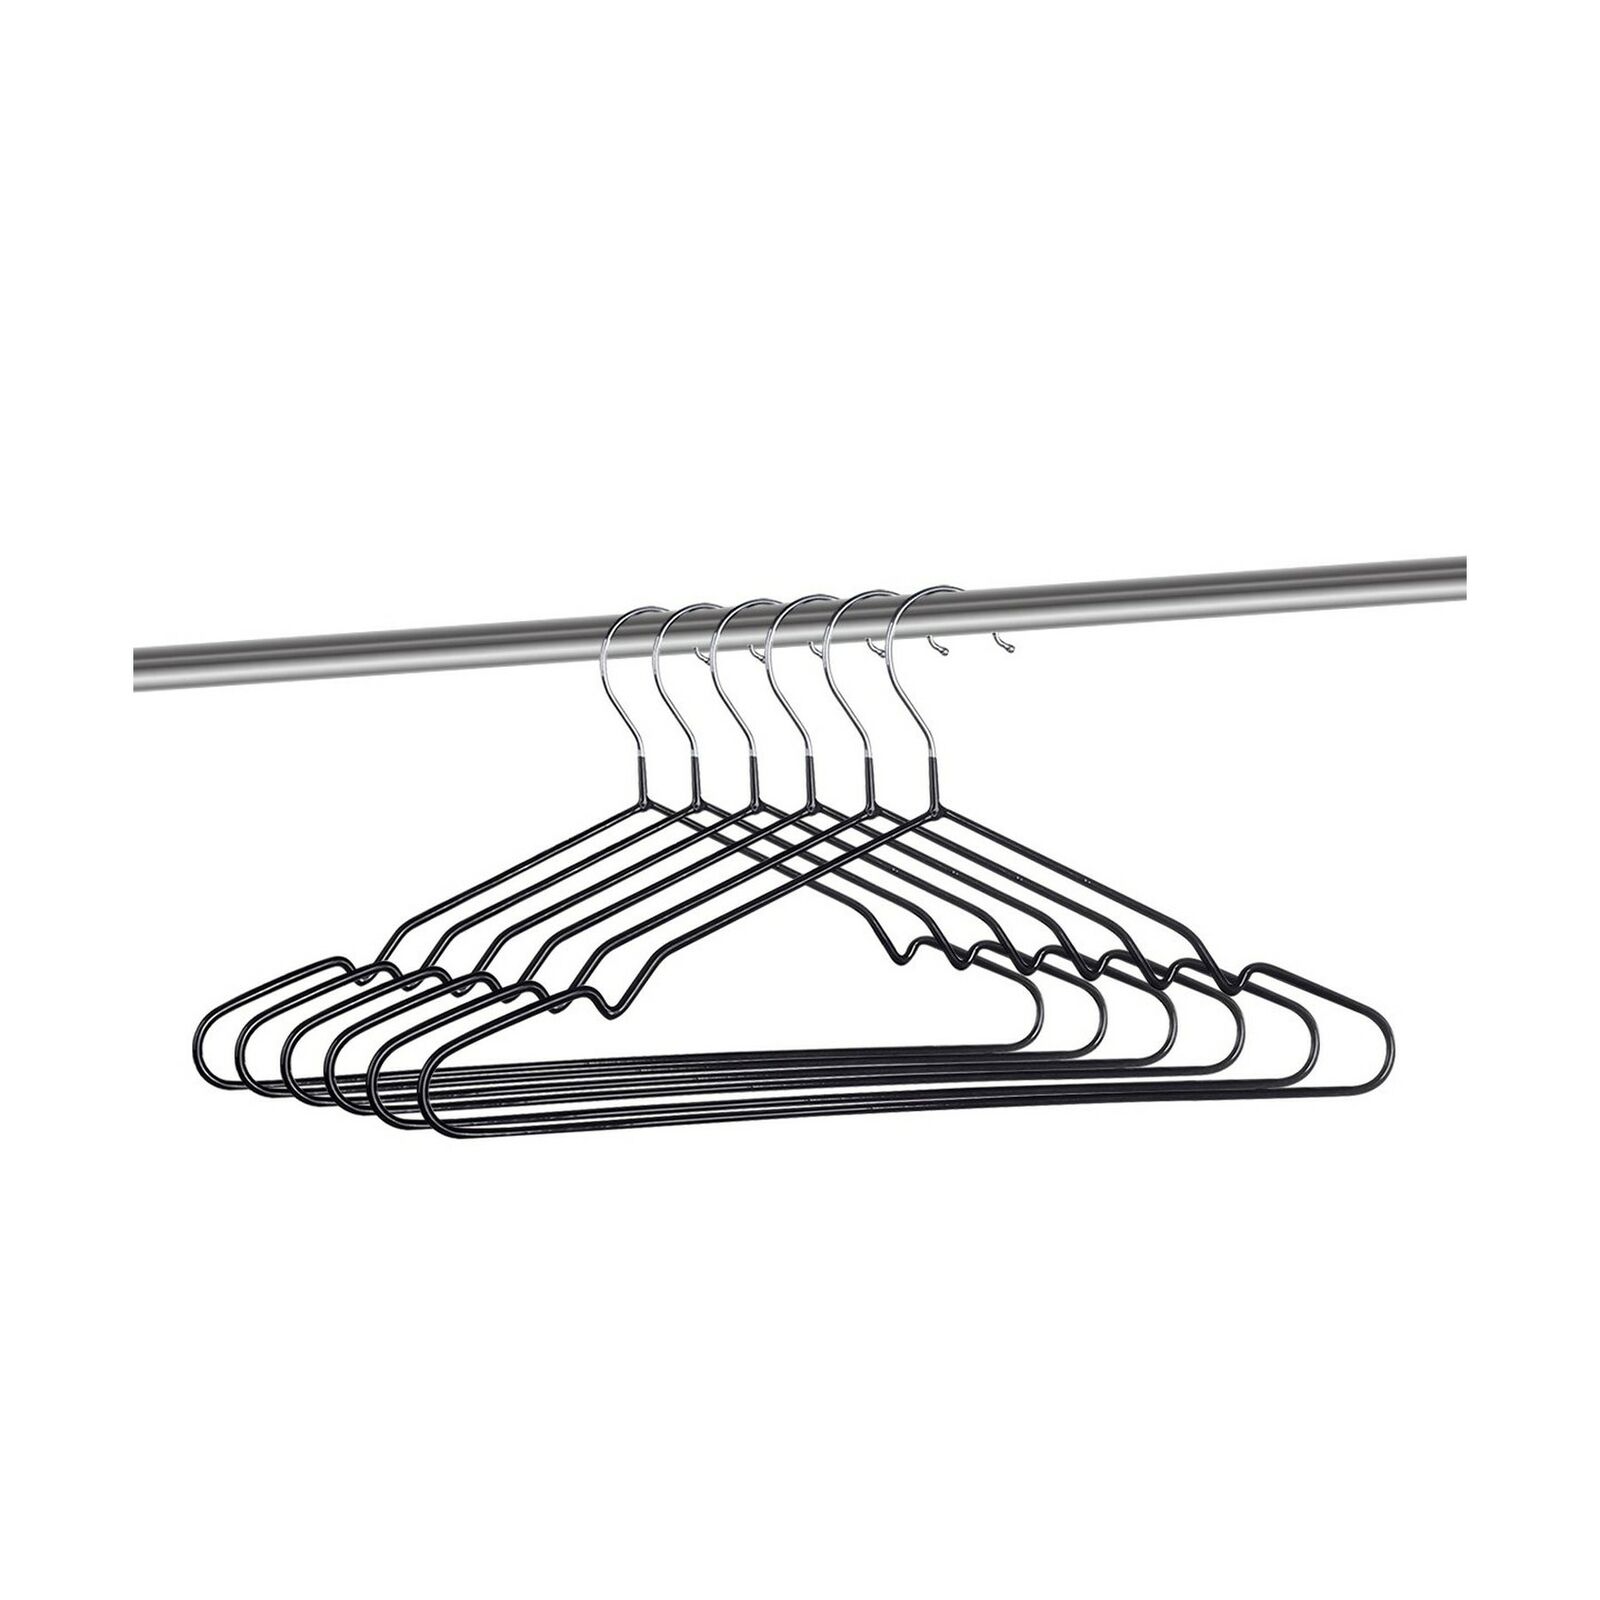  Kabudar Metal Hangers Non-Slip Suit Coat Hangers Chrome and  Black Friction, Metal Clothes Hanger with Rubber Coating, 16 Inches Wide,  Set of 20 (Black) : Home & Kitchen